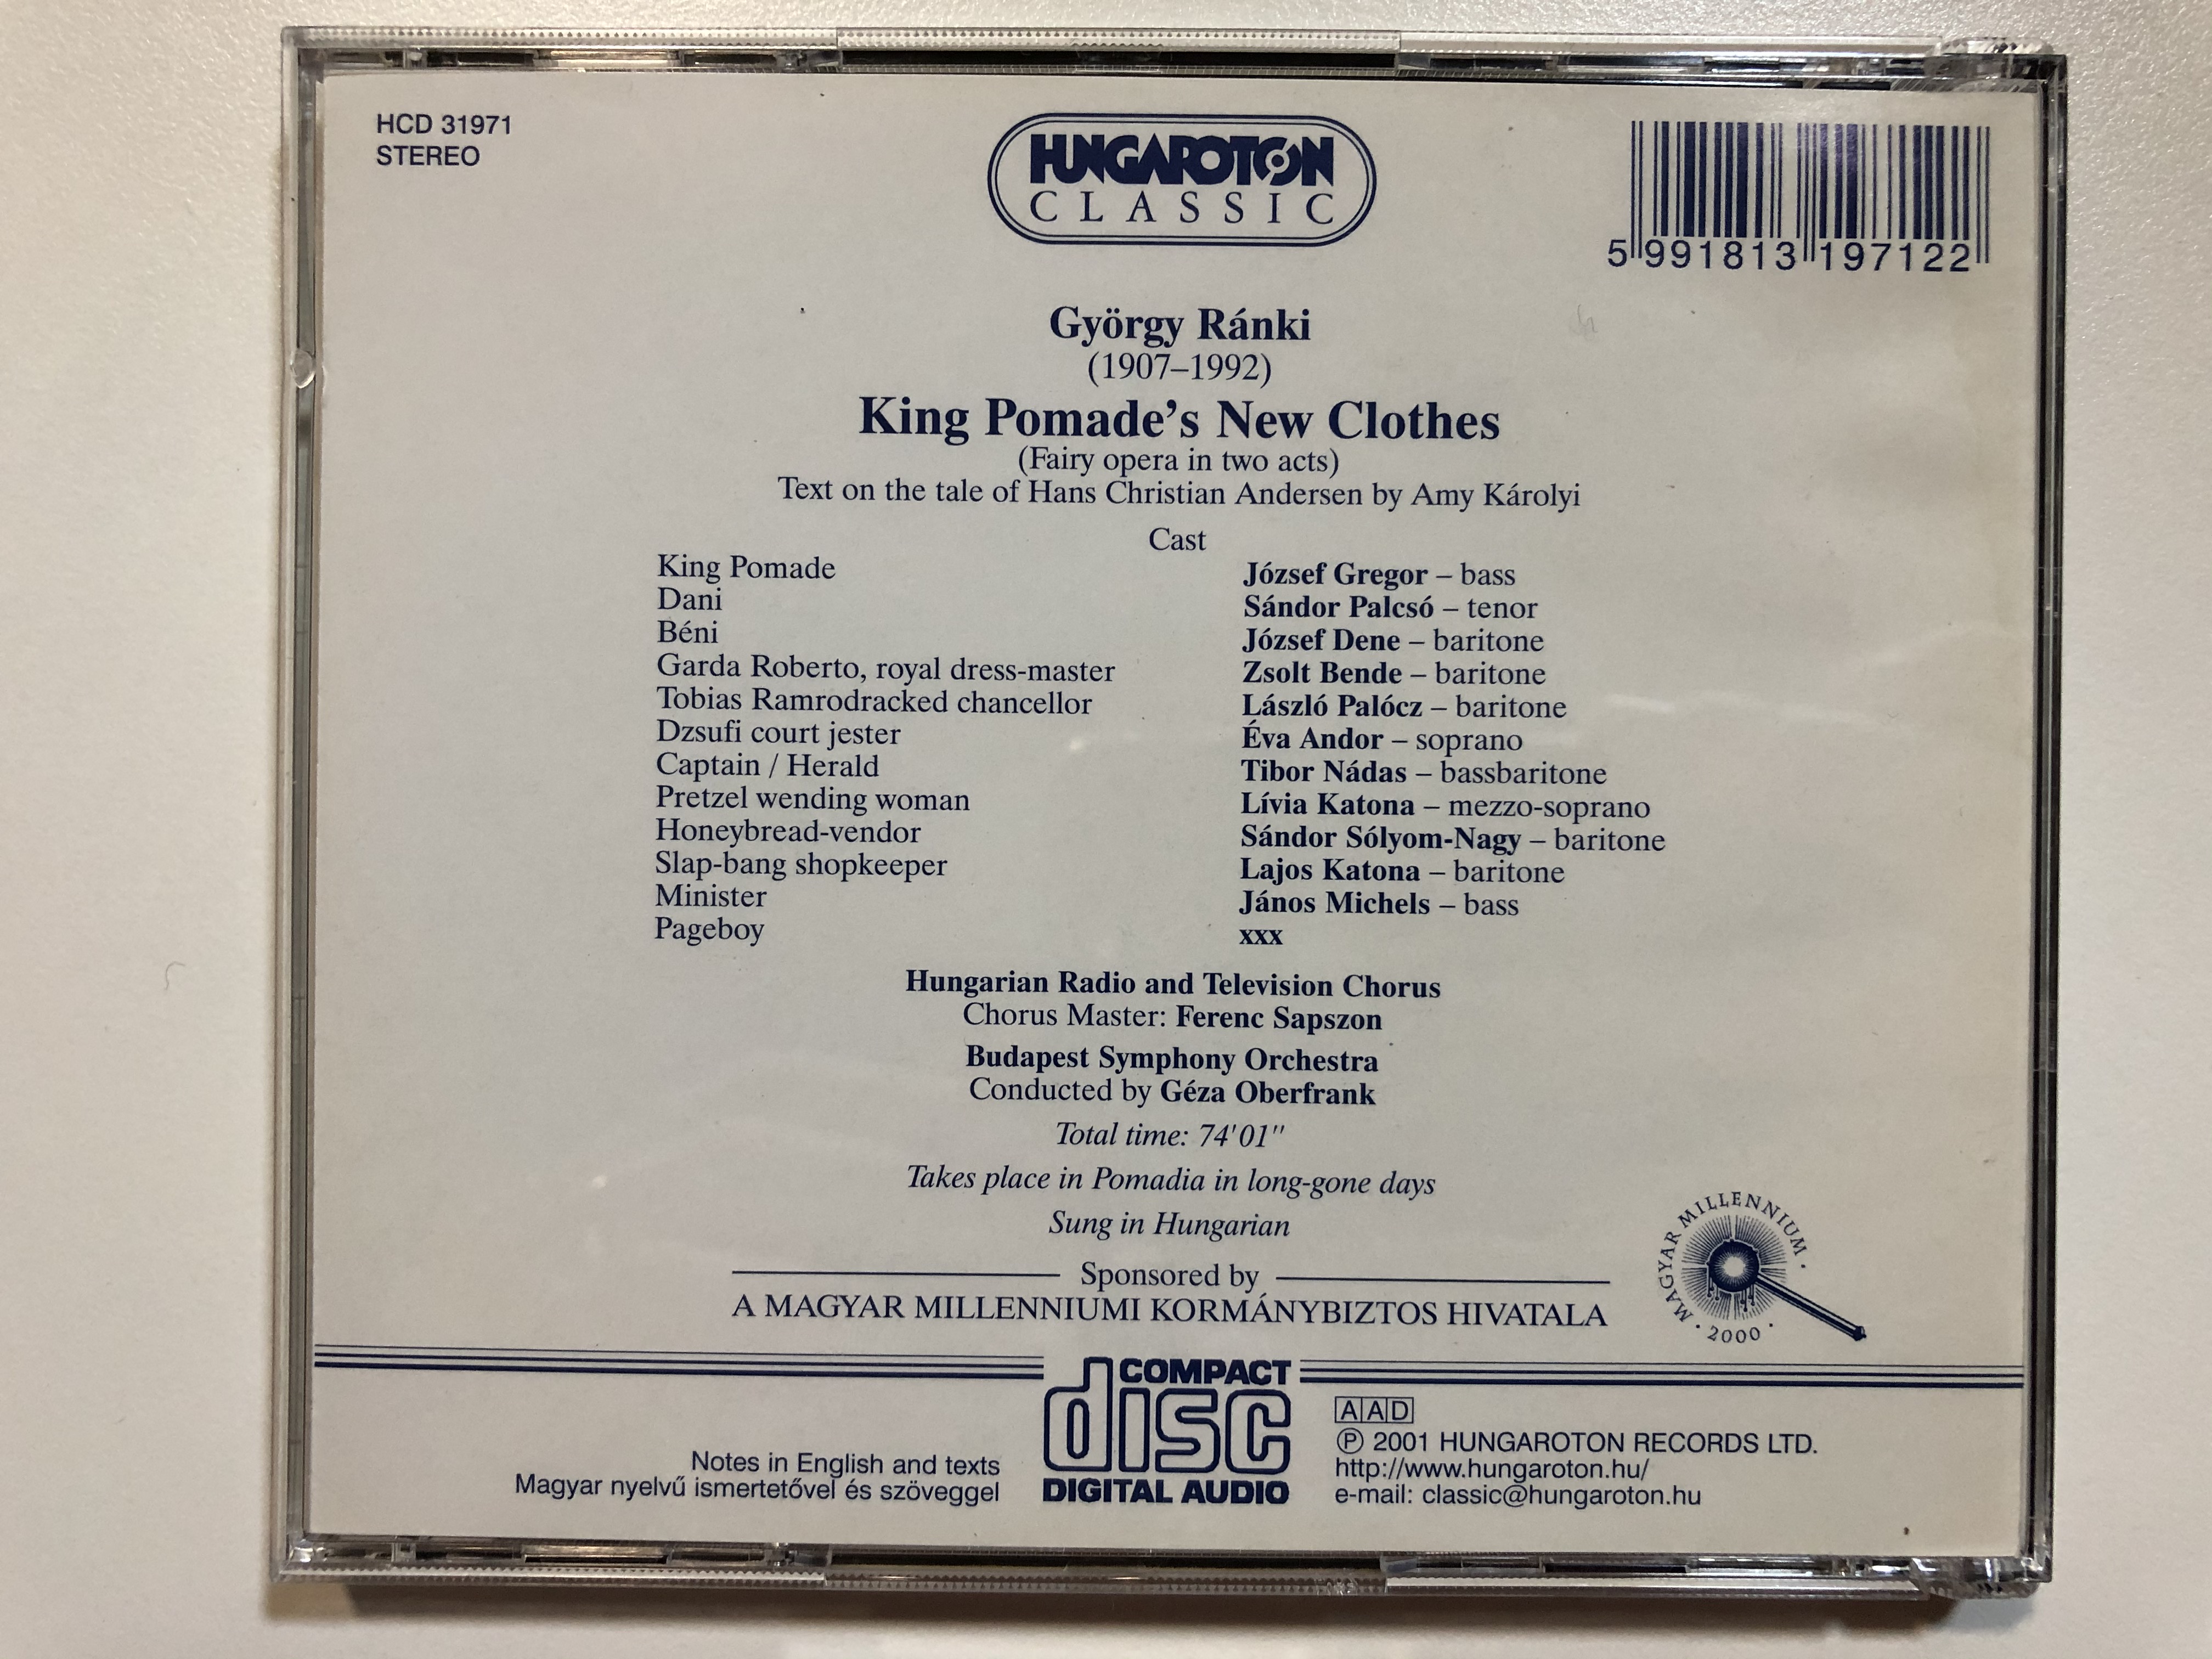 gyorgy-ranki-king-pomade-s-new-clothes-fairy-opera-in-two-acts-jozsef-gregor-budapest-symphony-orchestra-geza-oberfrank-hungaroton-classic-audio-cd-2001-stereo-hcd-31971-14-.jpg